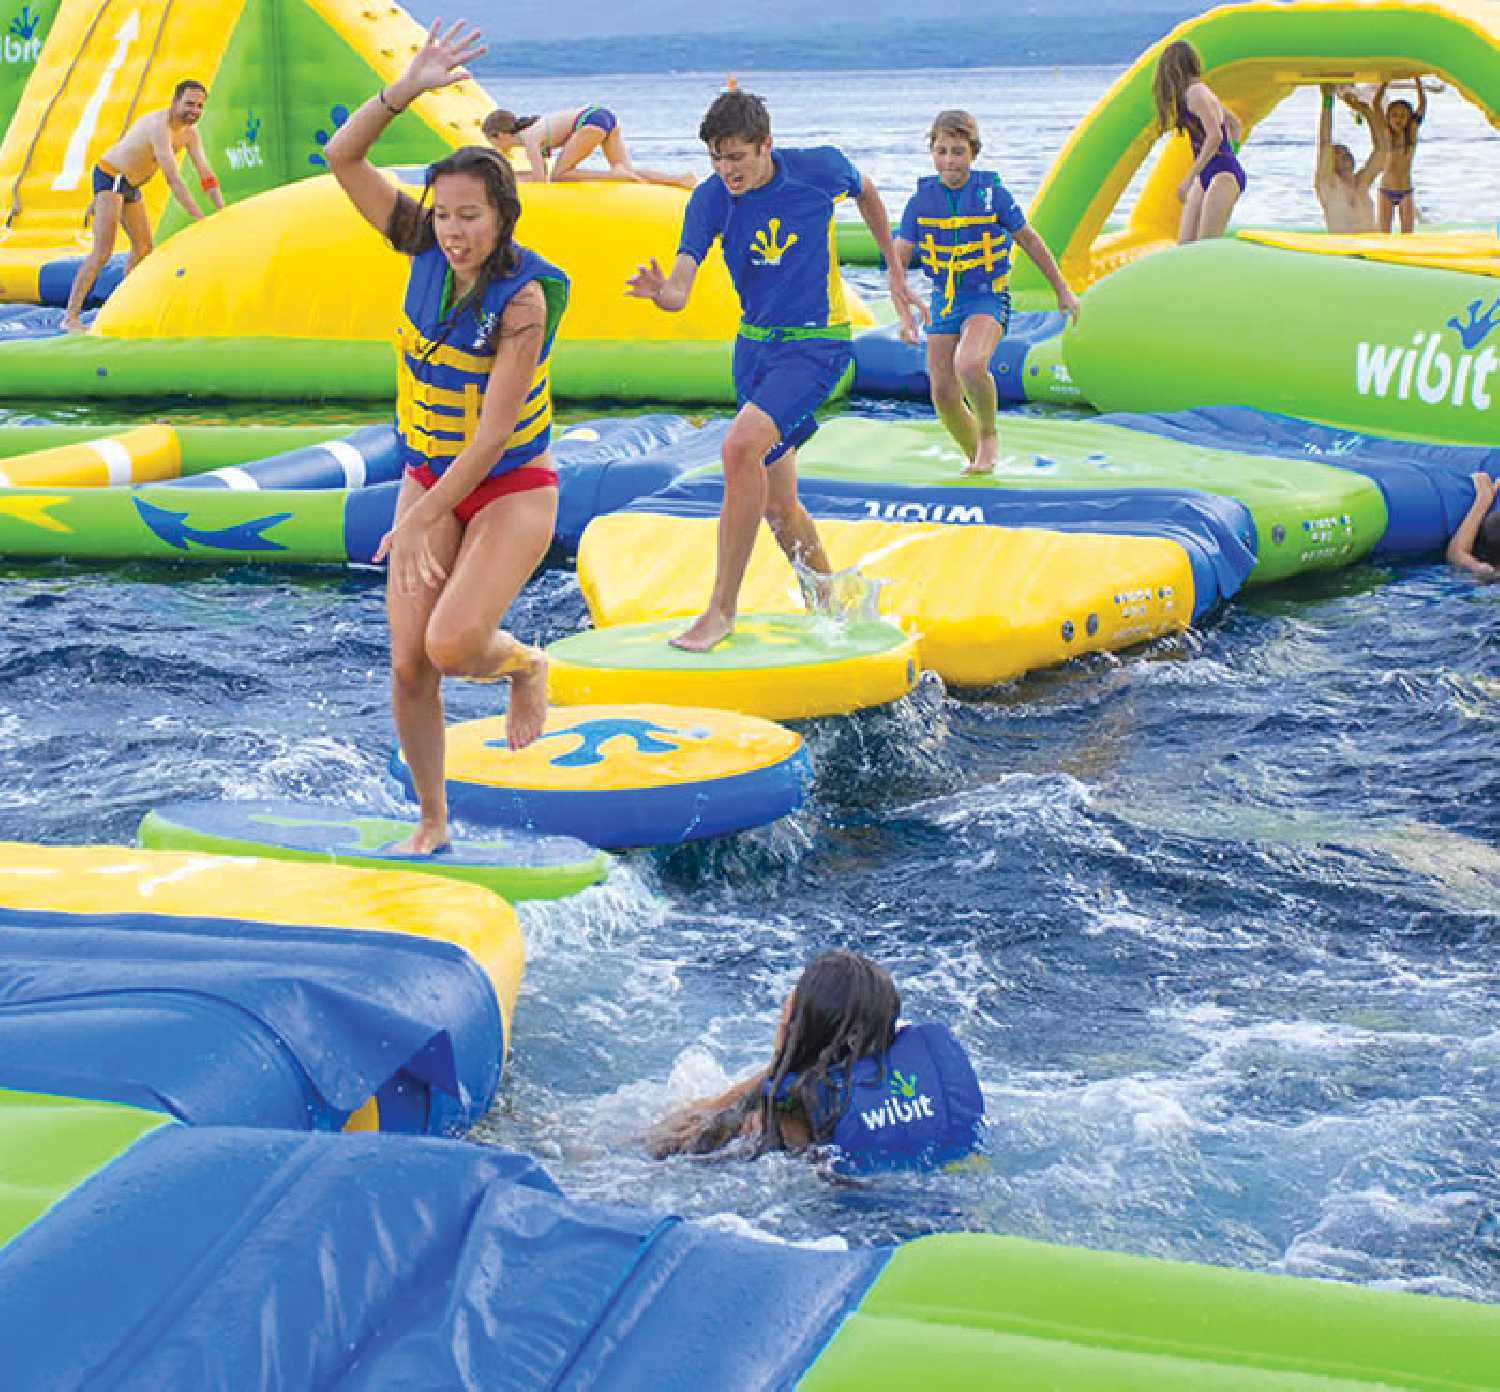 The Aquatic Adventures floating water park will open this week at Kenosee and will be open for the July long weekend.